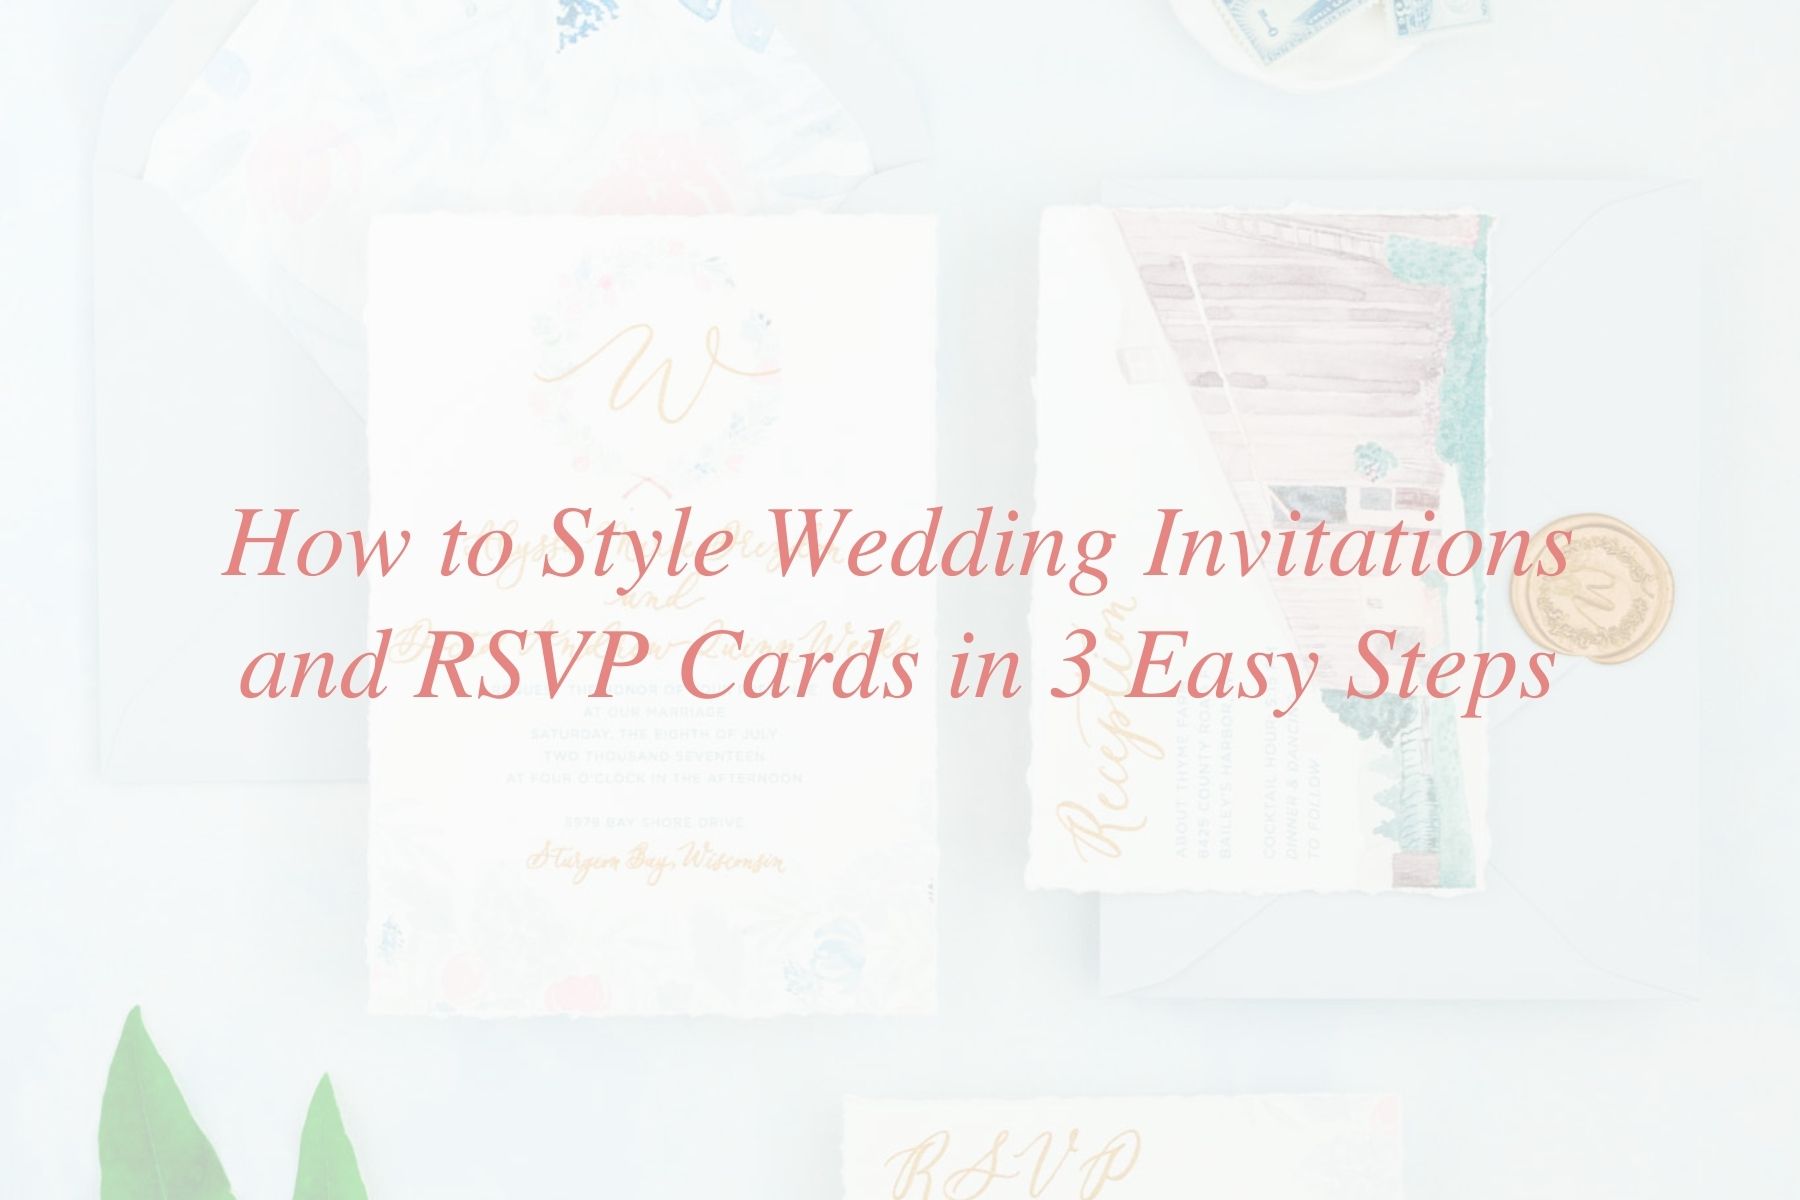 how to style wedding invitations and rsvp cards in 3 easy steps